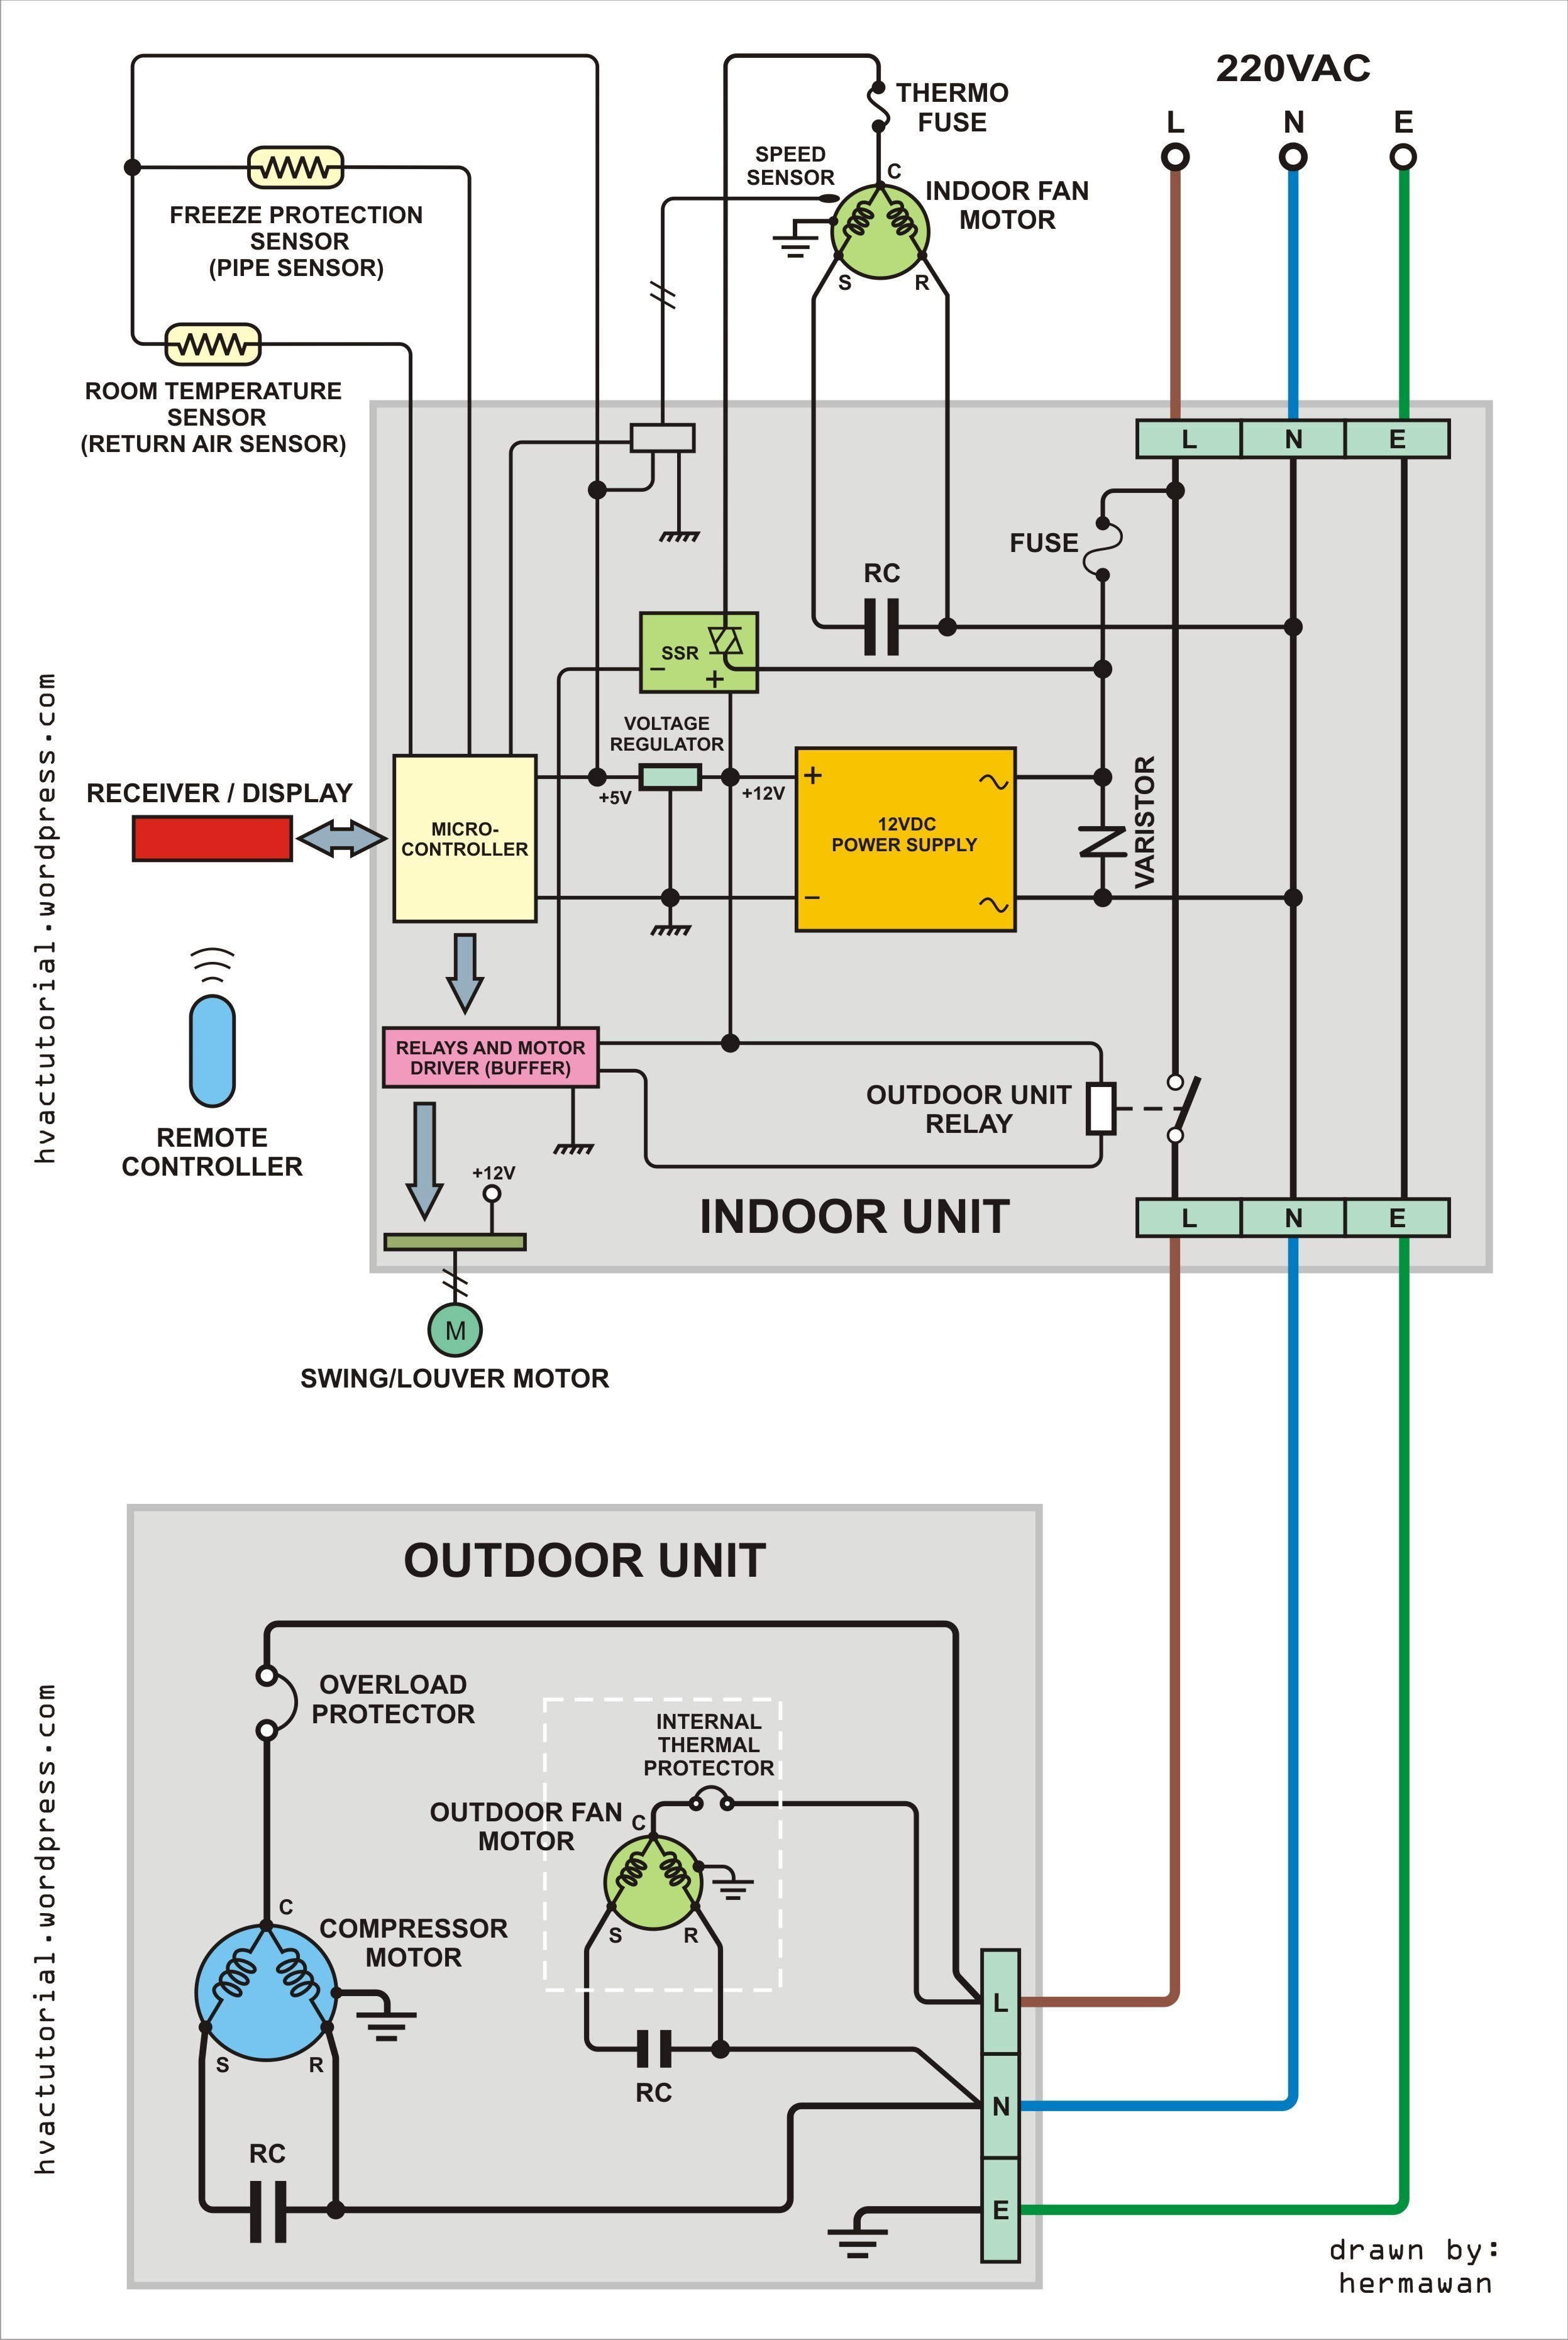 Car Ac Working Diagram Car Diagram Wiring Diagram for Auto Airnditioning New Carnditioner